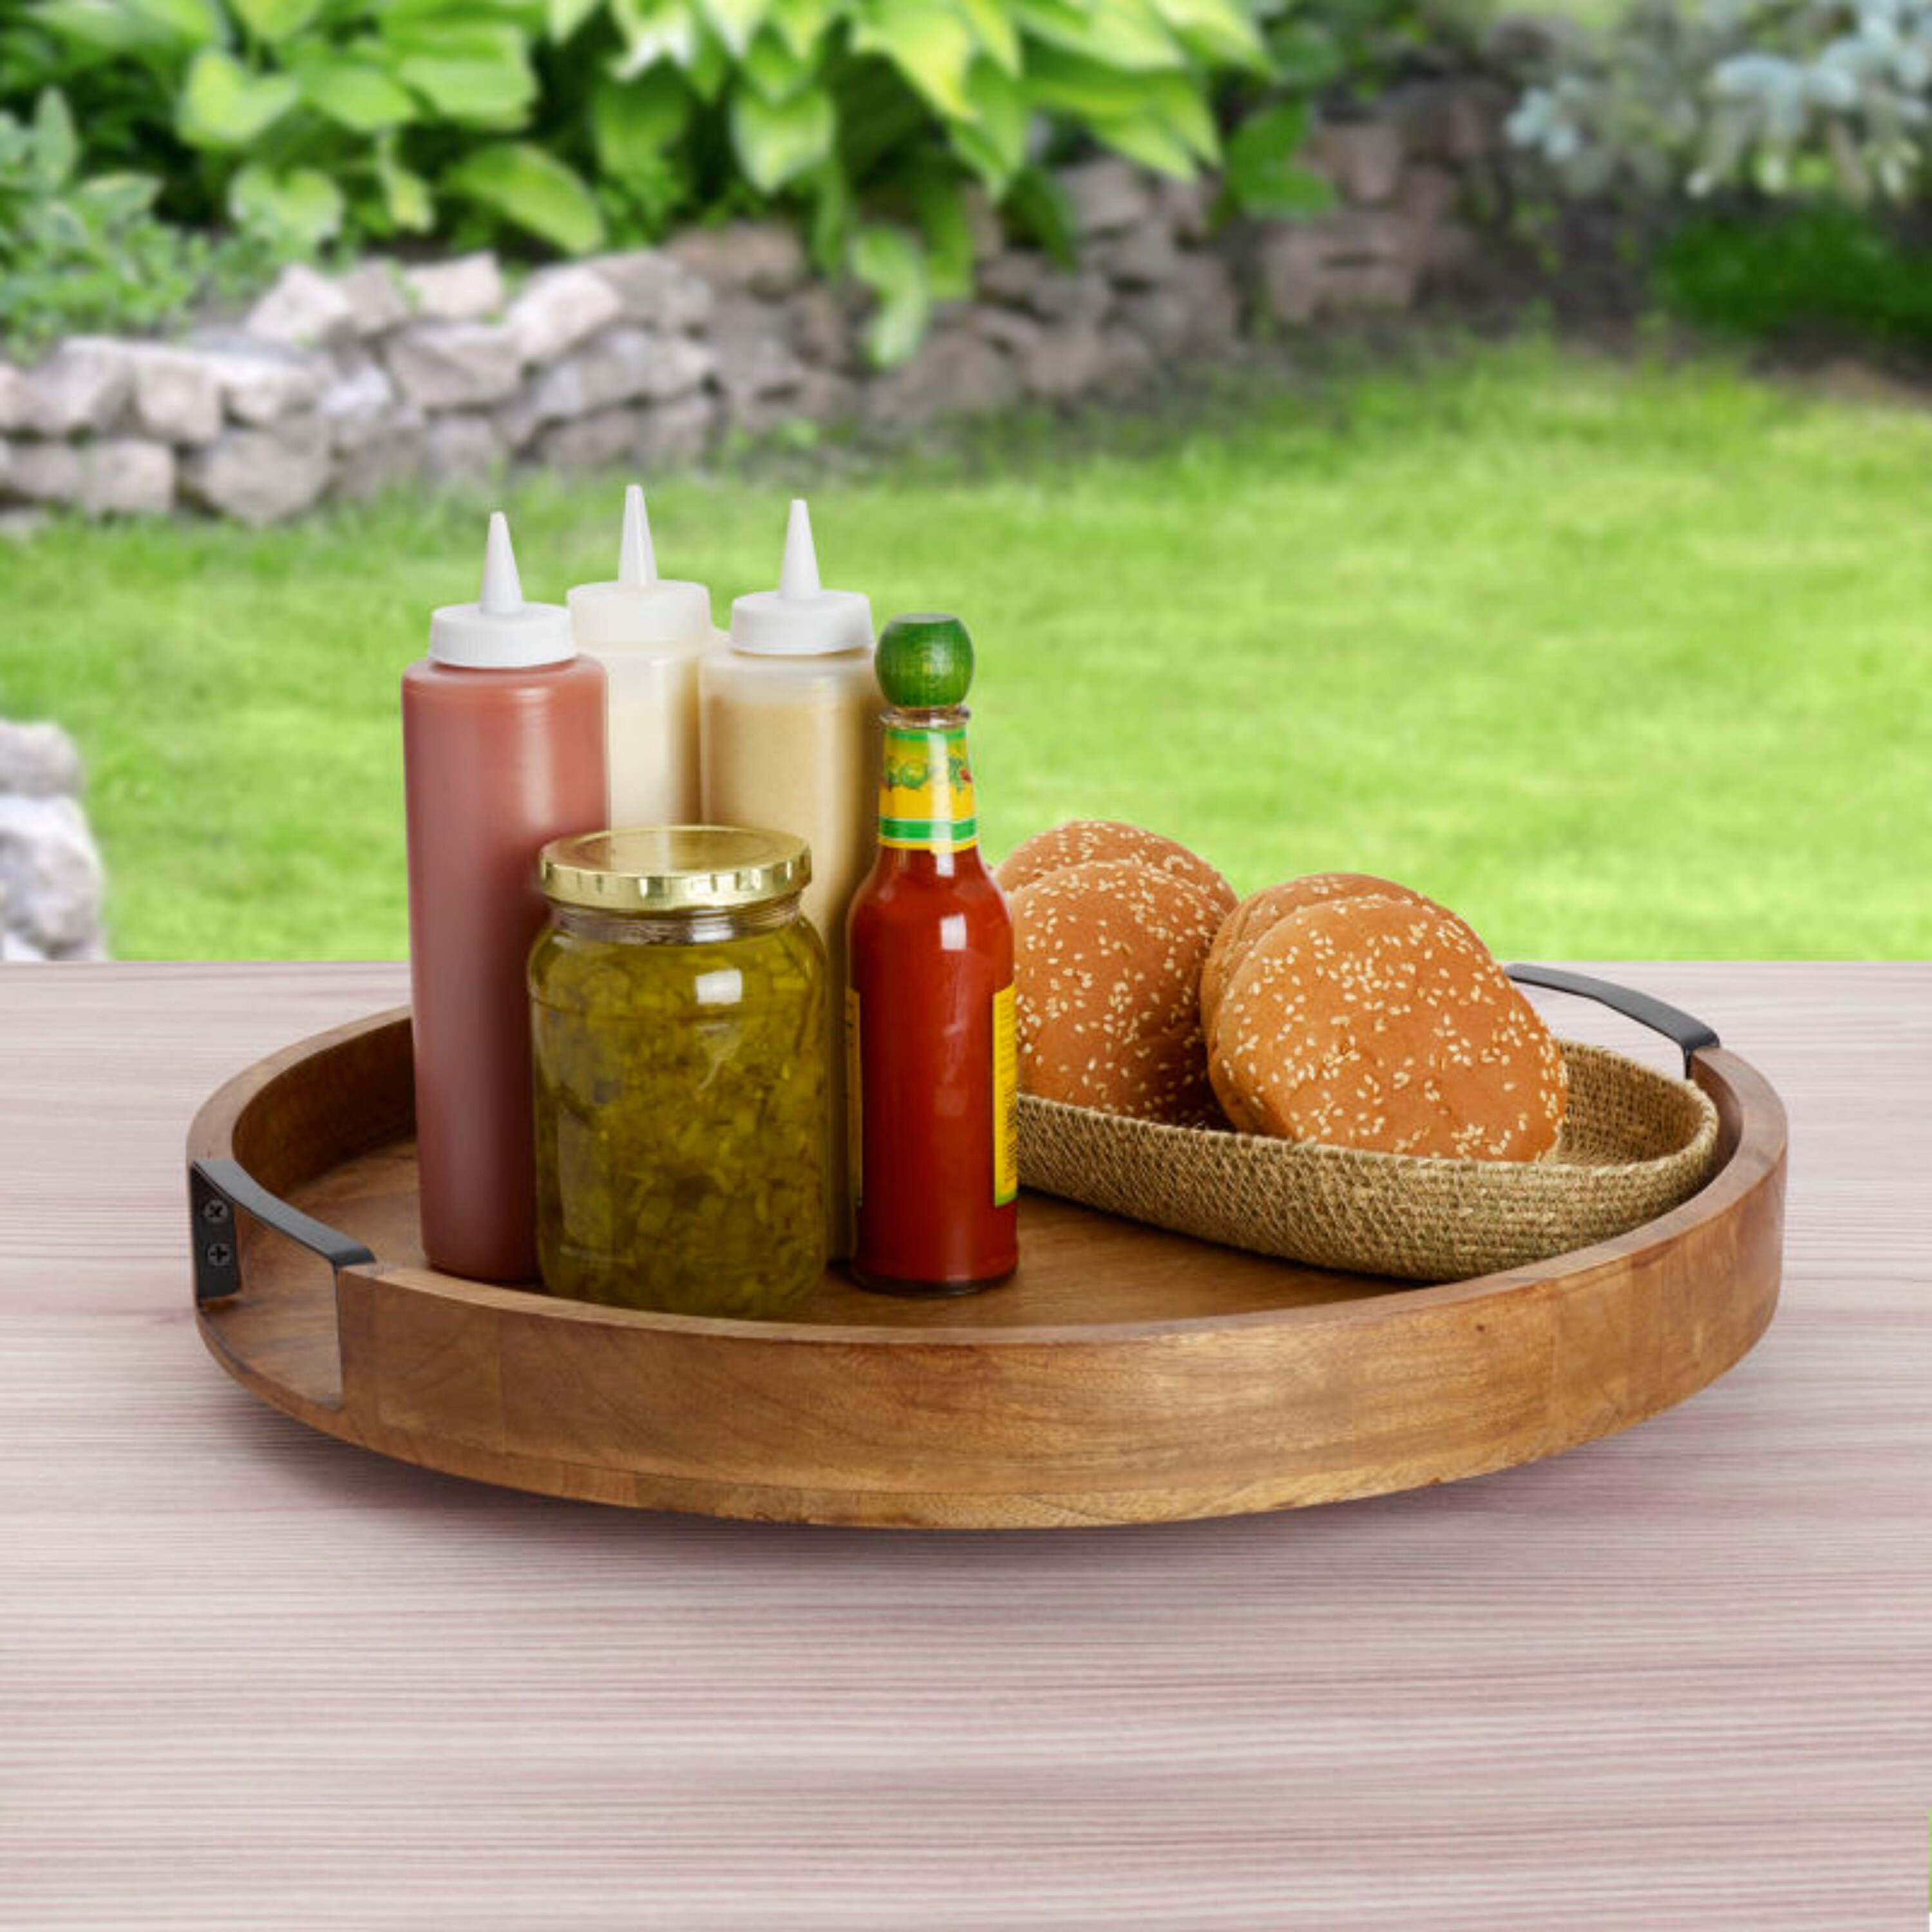 https://ak1.ostkcdn.com/images/products/is/images/direct/fd8a88883a62e5fe5f0b15ee53fee2147d0c822d/Gourmet-Basics-by-Mikasa-Round-Lazy-Susan.jpg